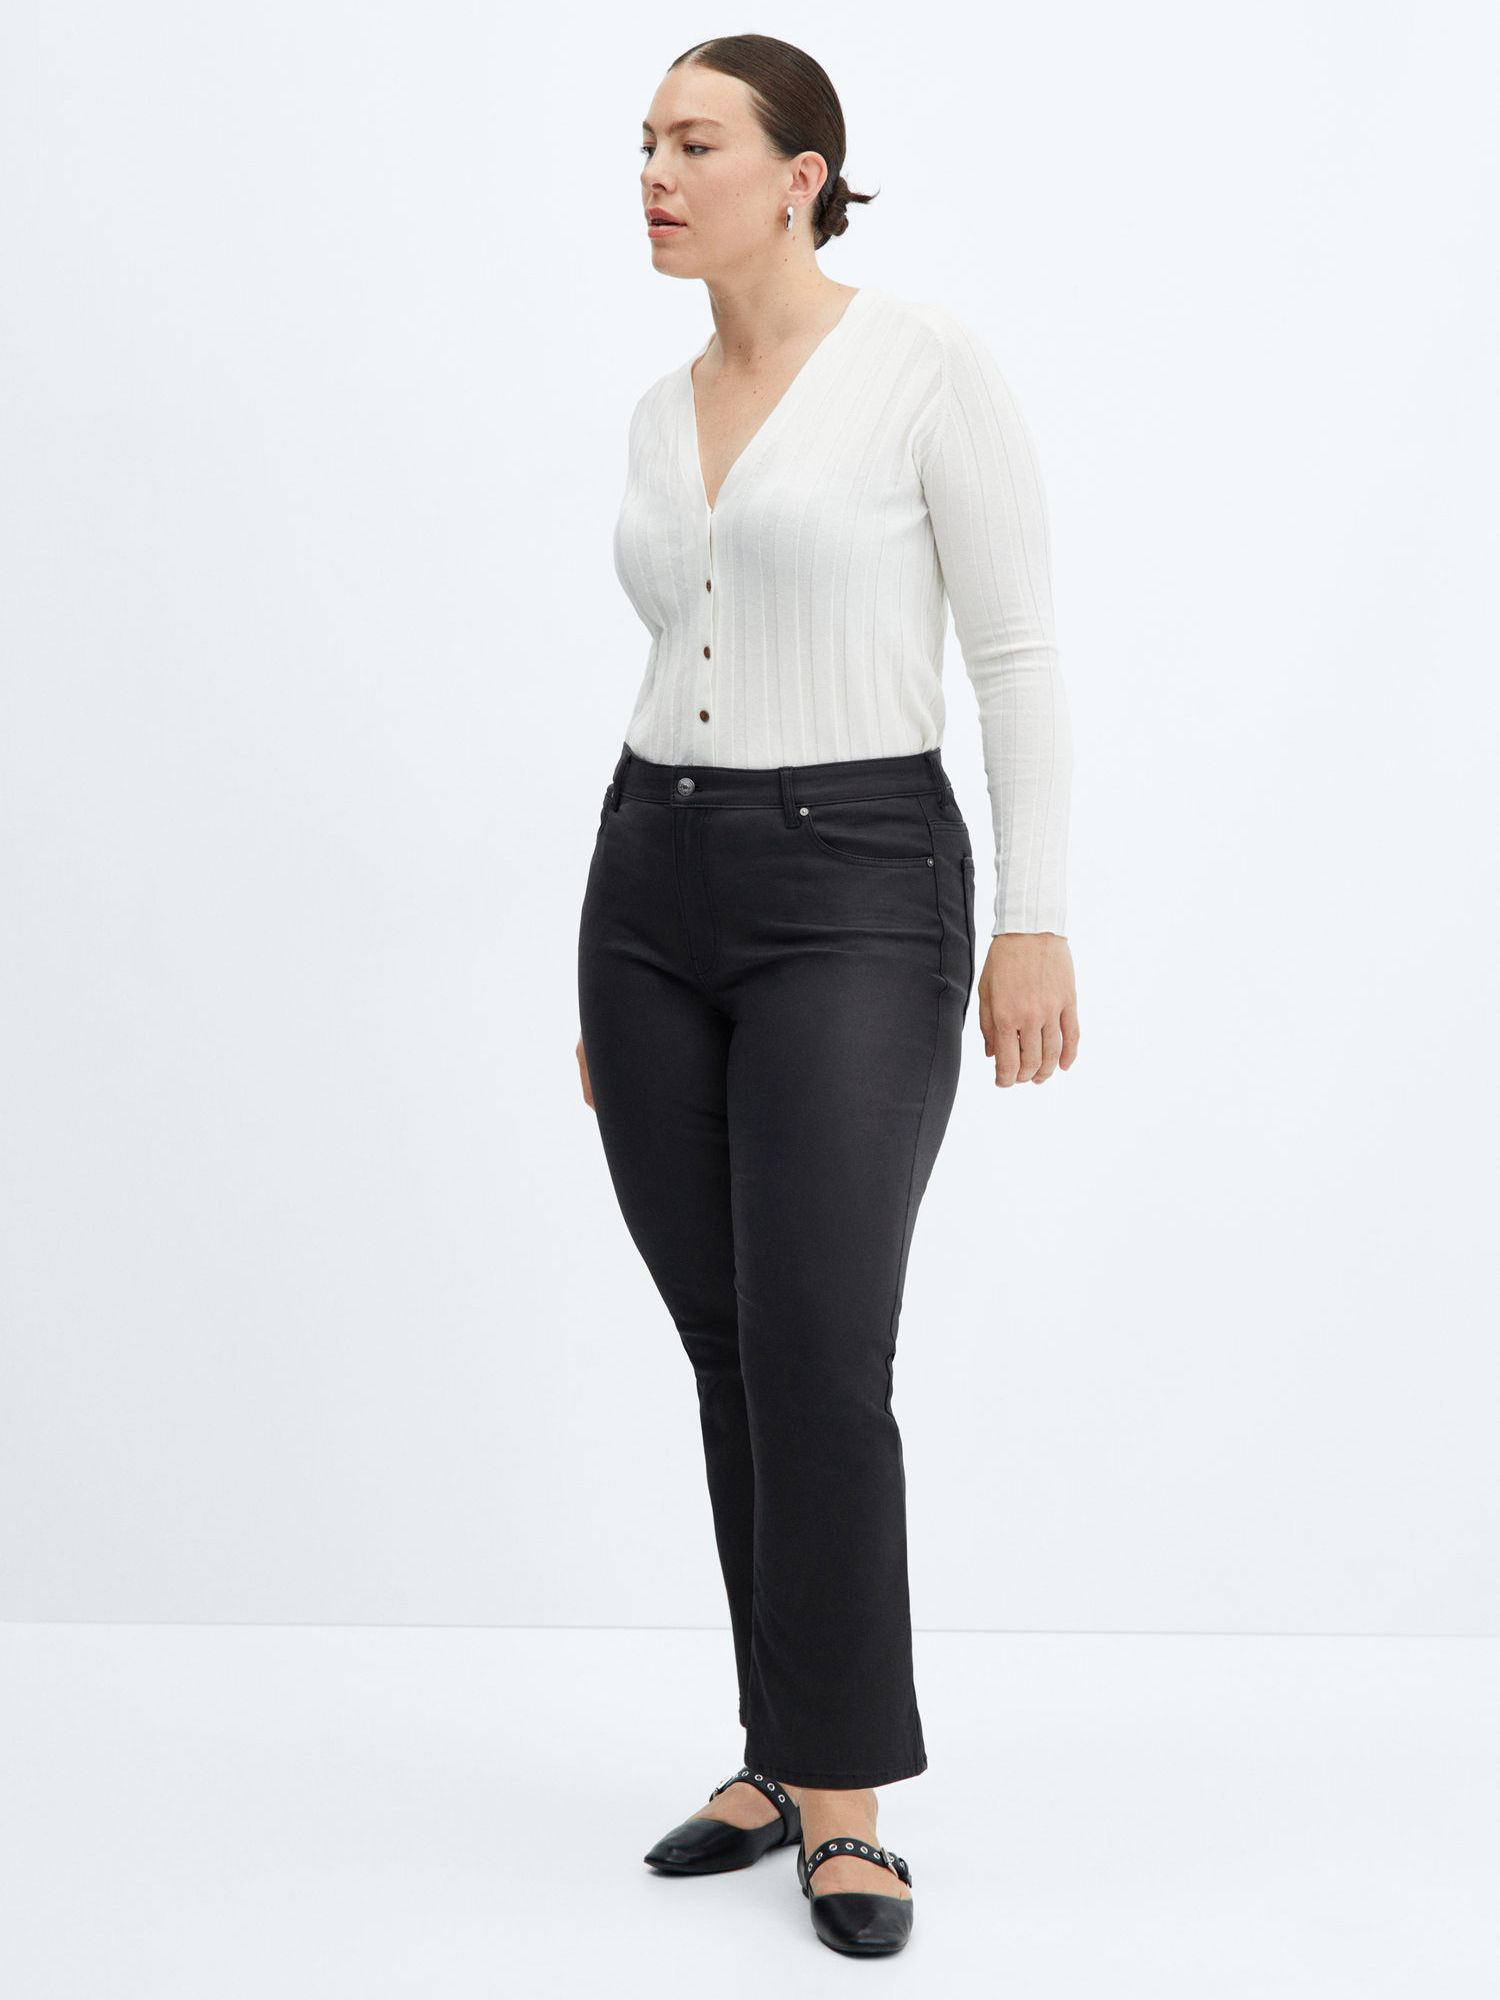 Buy Mango Sienna Waxed Flared Cropped Jeans, Black Online at johnlewis.com